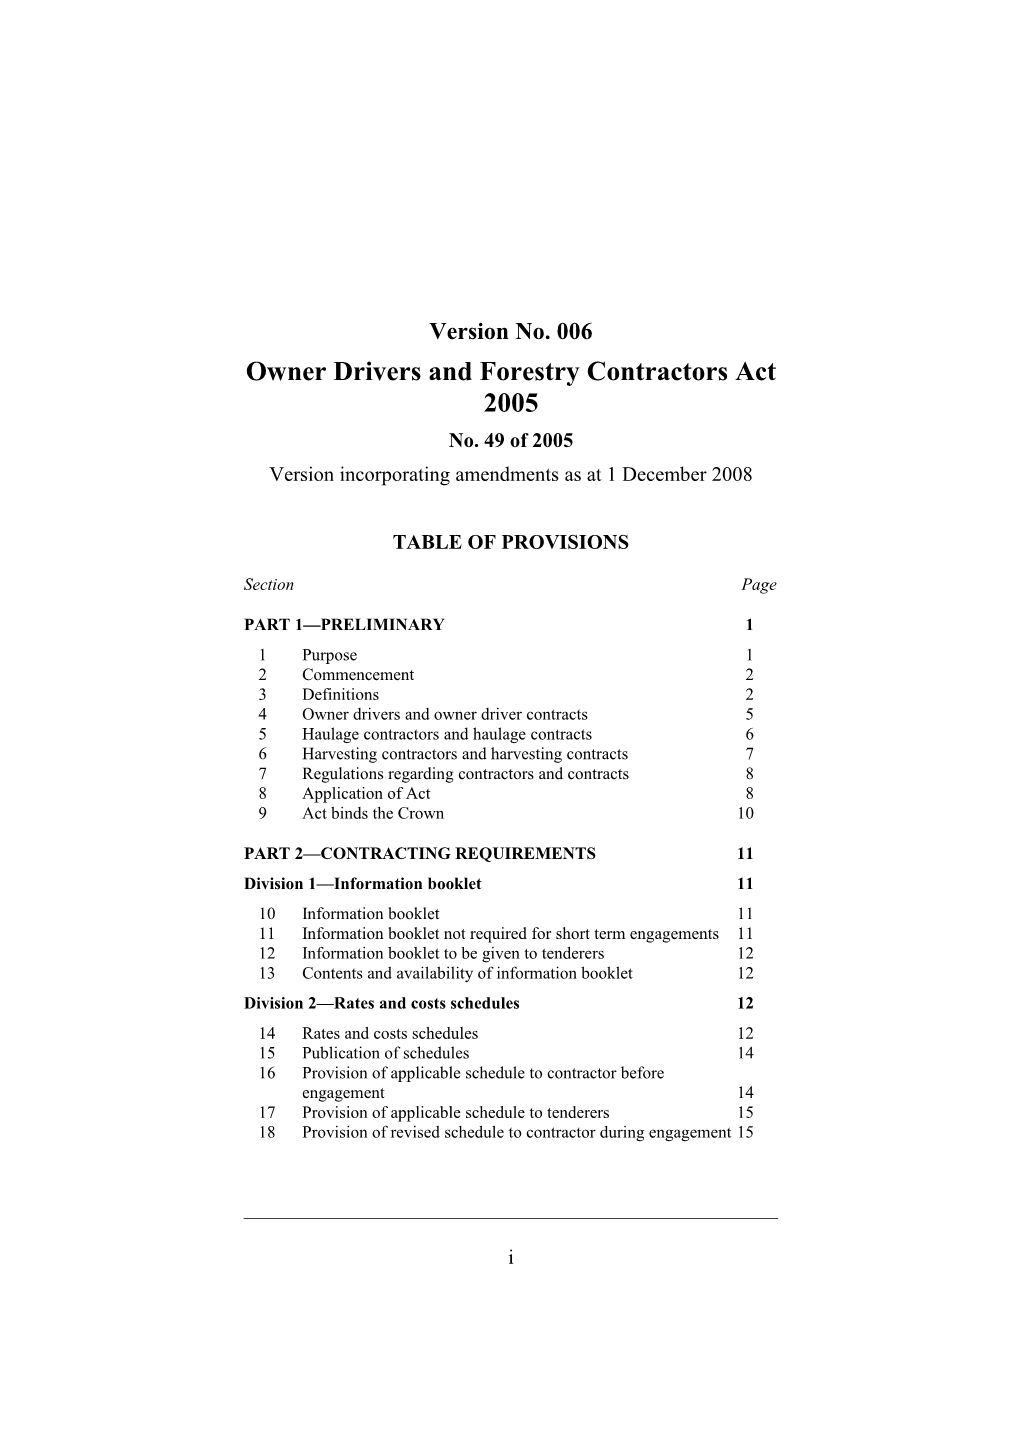 Owner Drivers and Forestry Contractors Act 2005